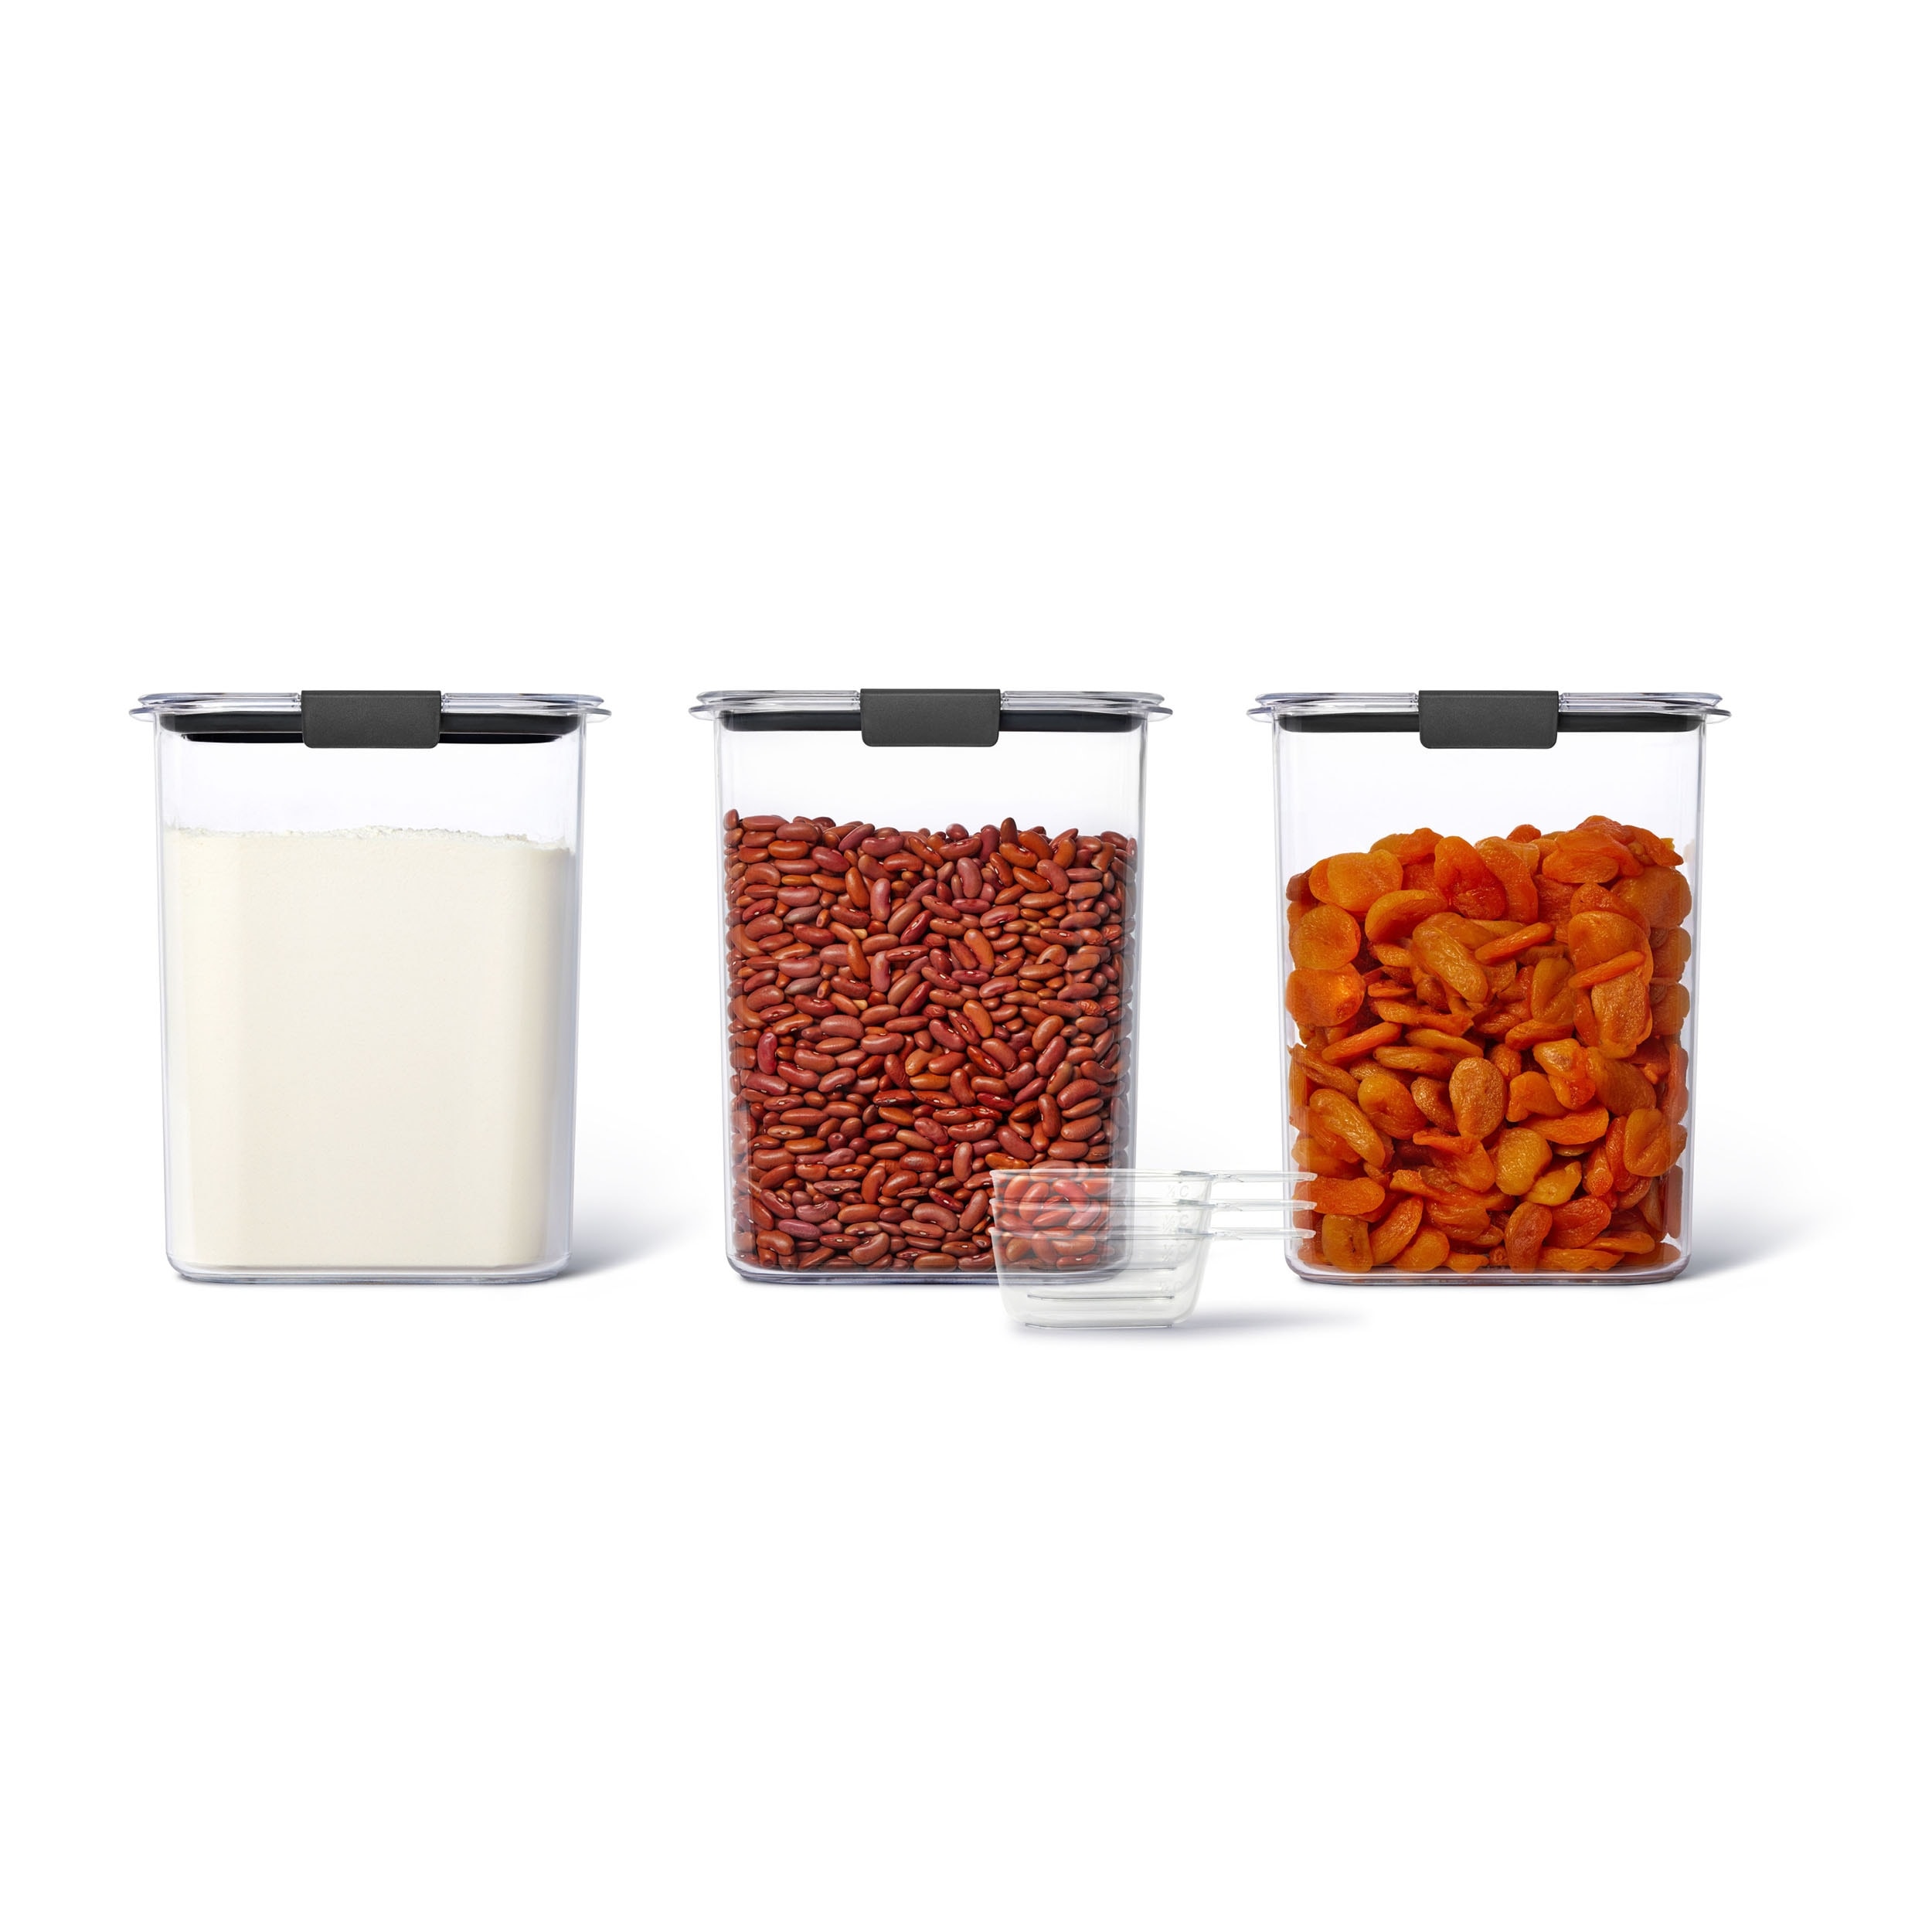 Rubbermaid Brilliance 4.7 C. Clear Rectangle Food Storage